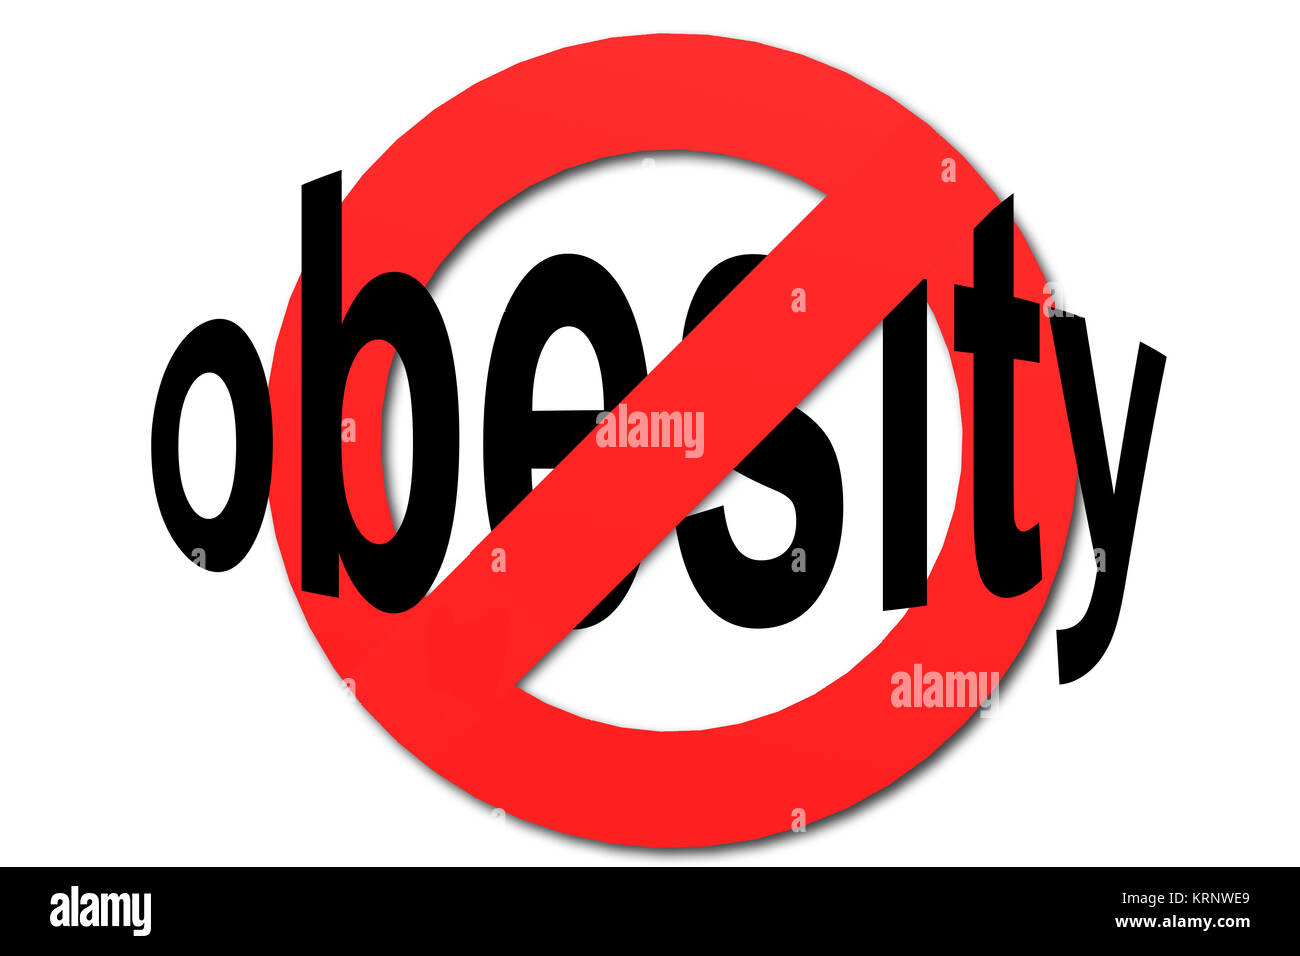 Stop obesity sign in red Stock Photo